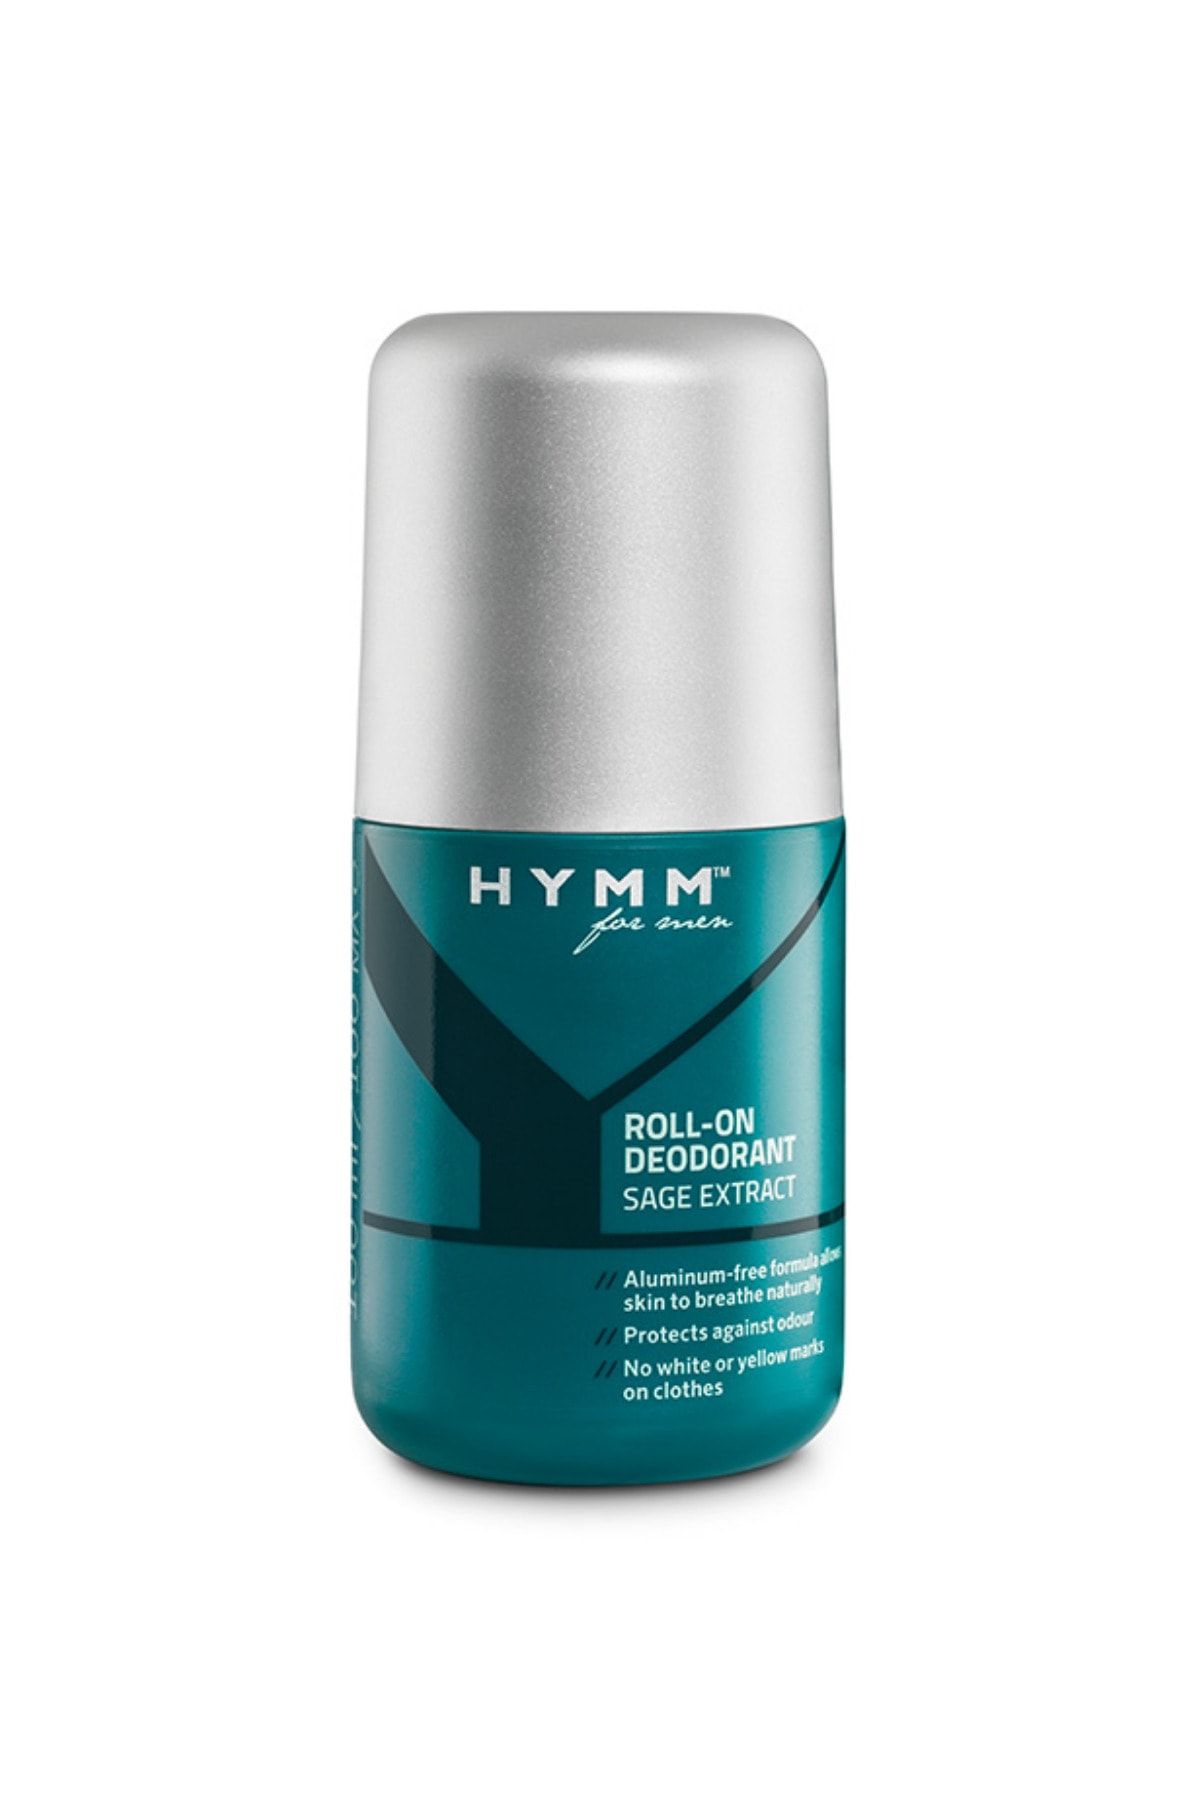 Amway For Man Roll-on Deodorant Hymm